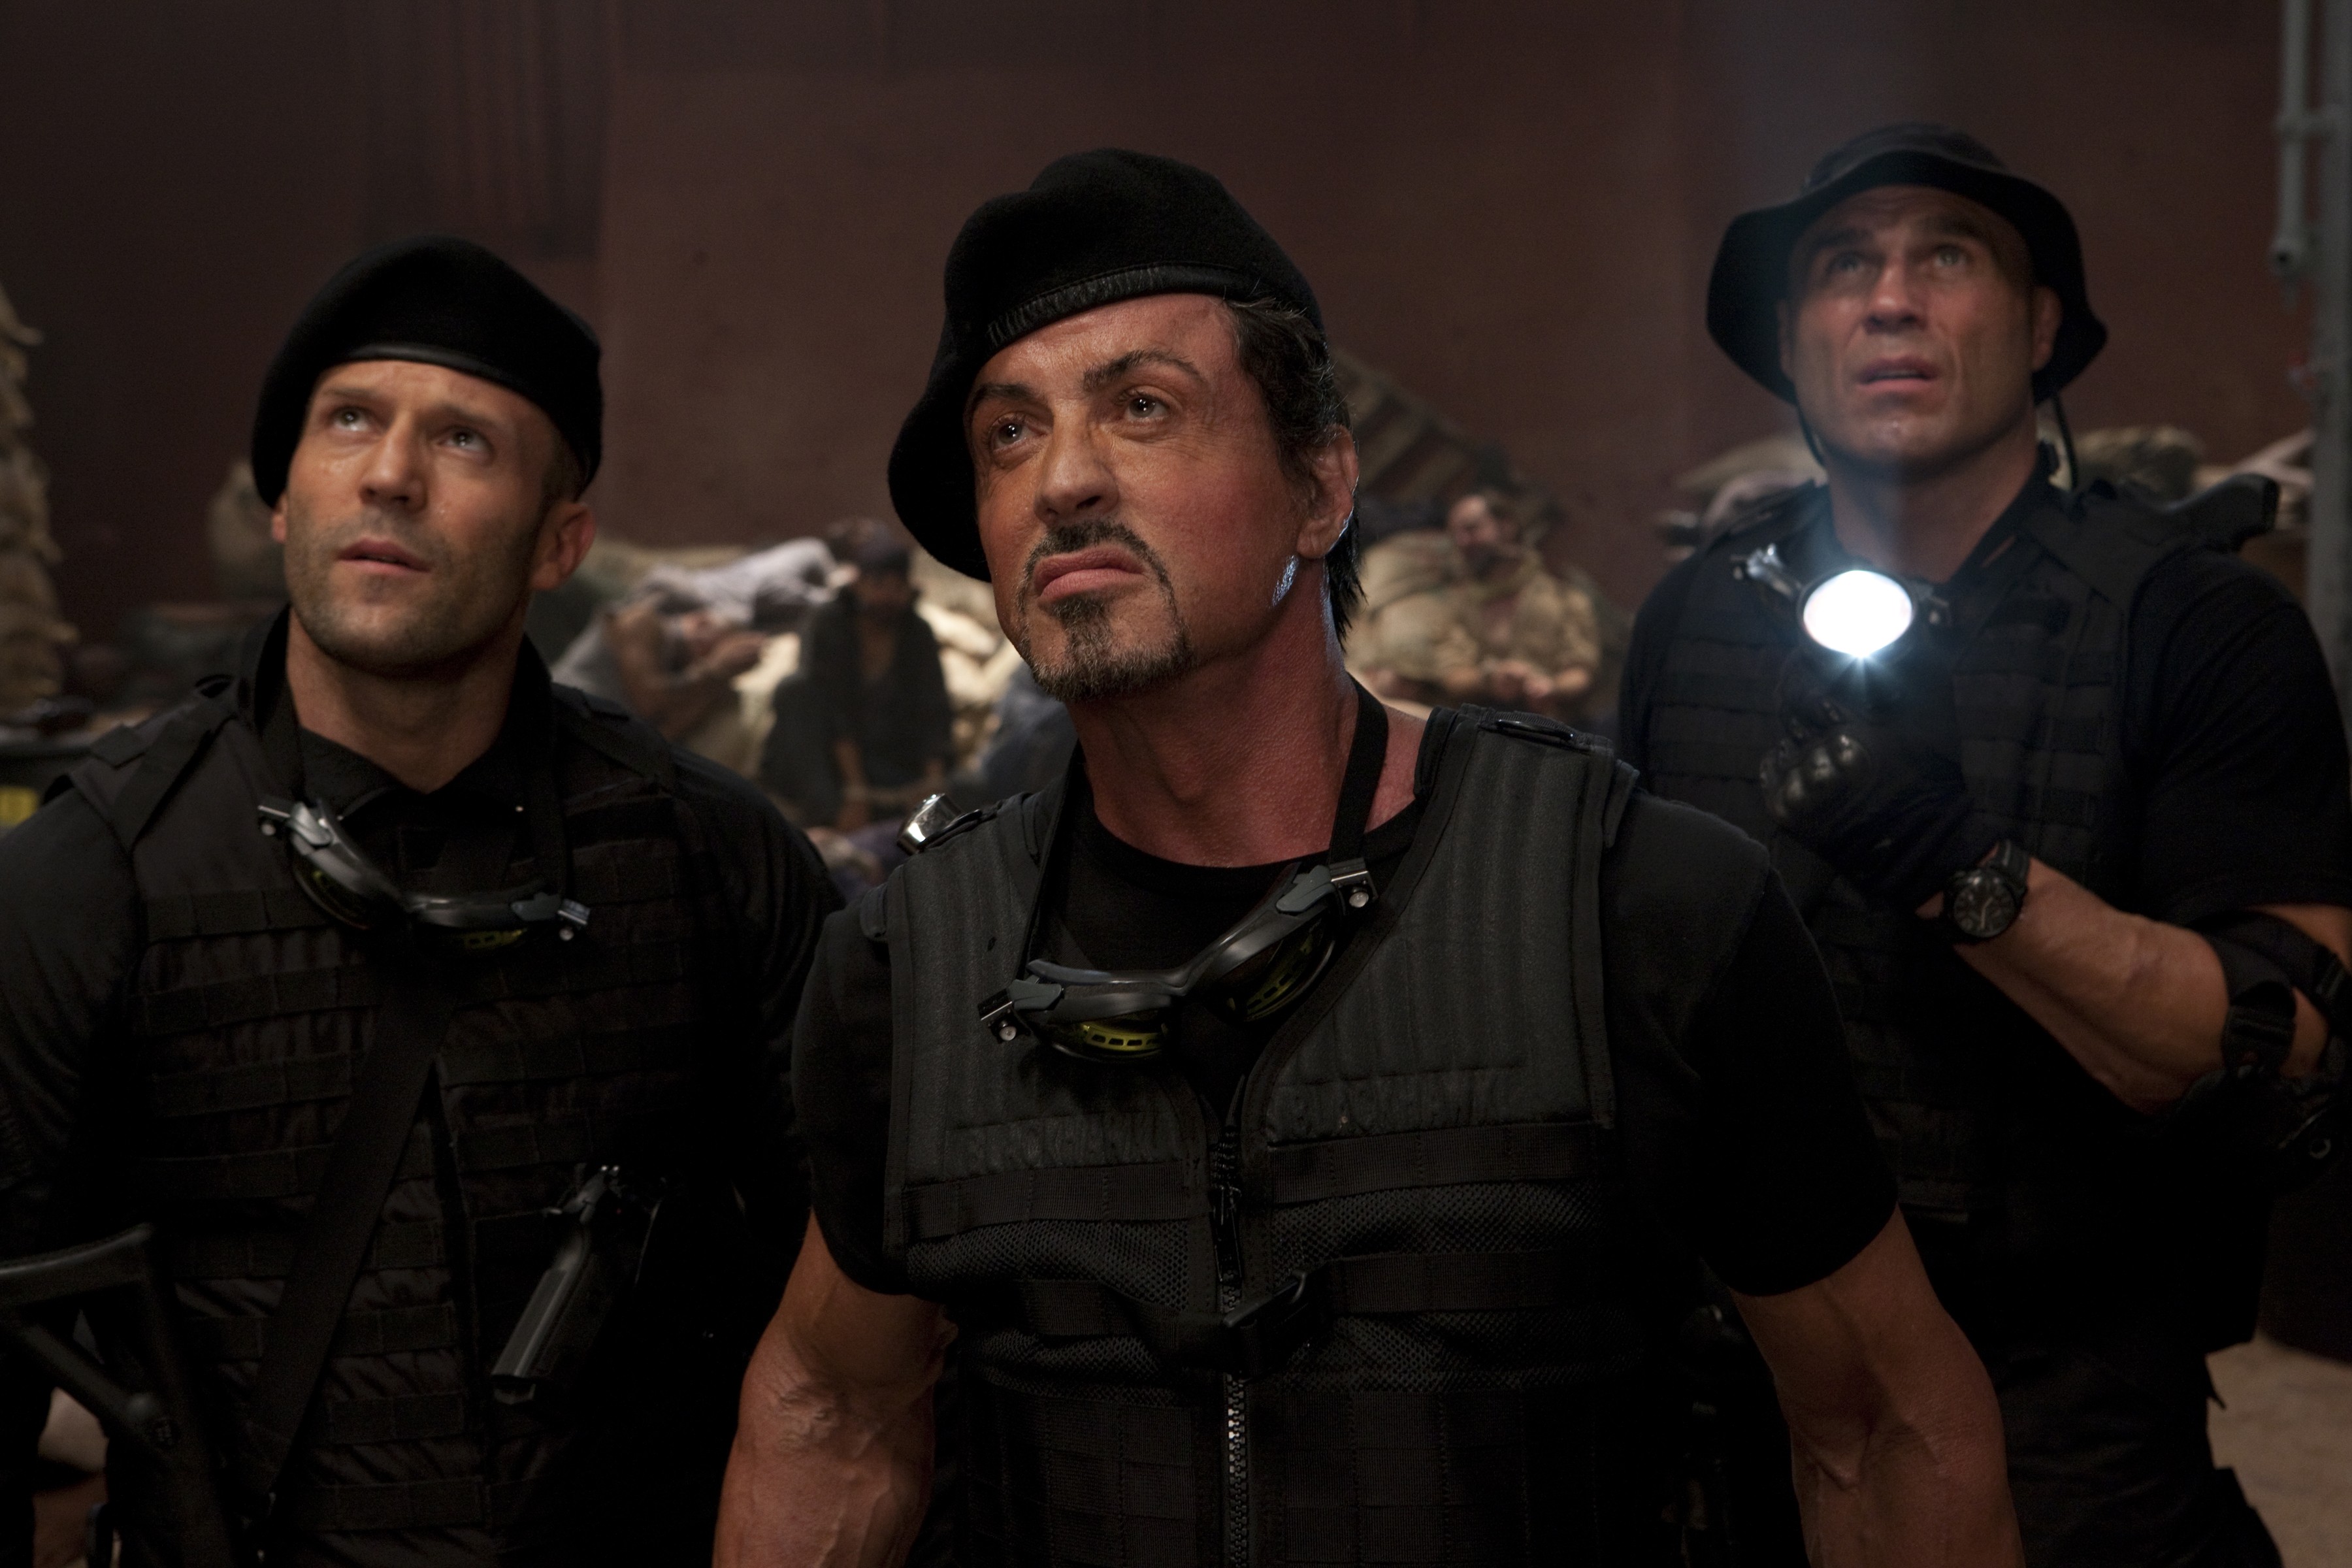 UFC, Sylvester Stallone, The Expendables, Randy Couture, Dolph Lundgren